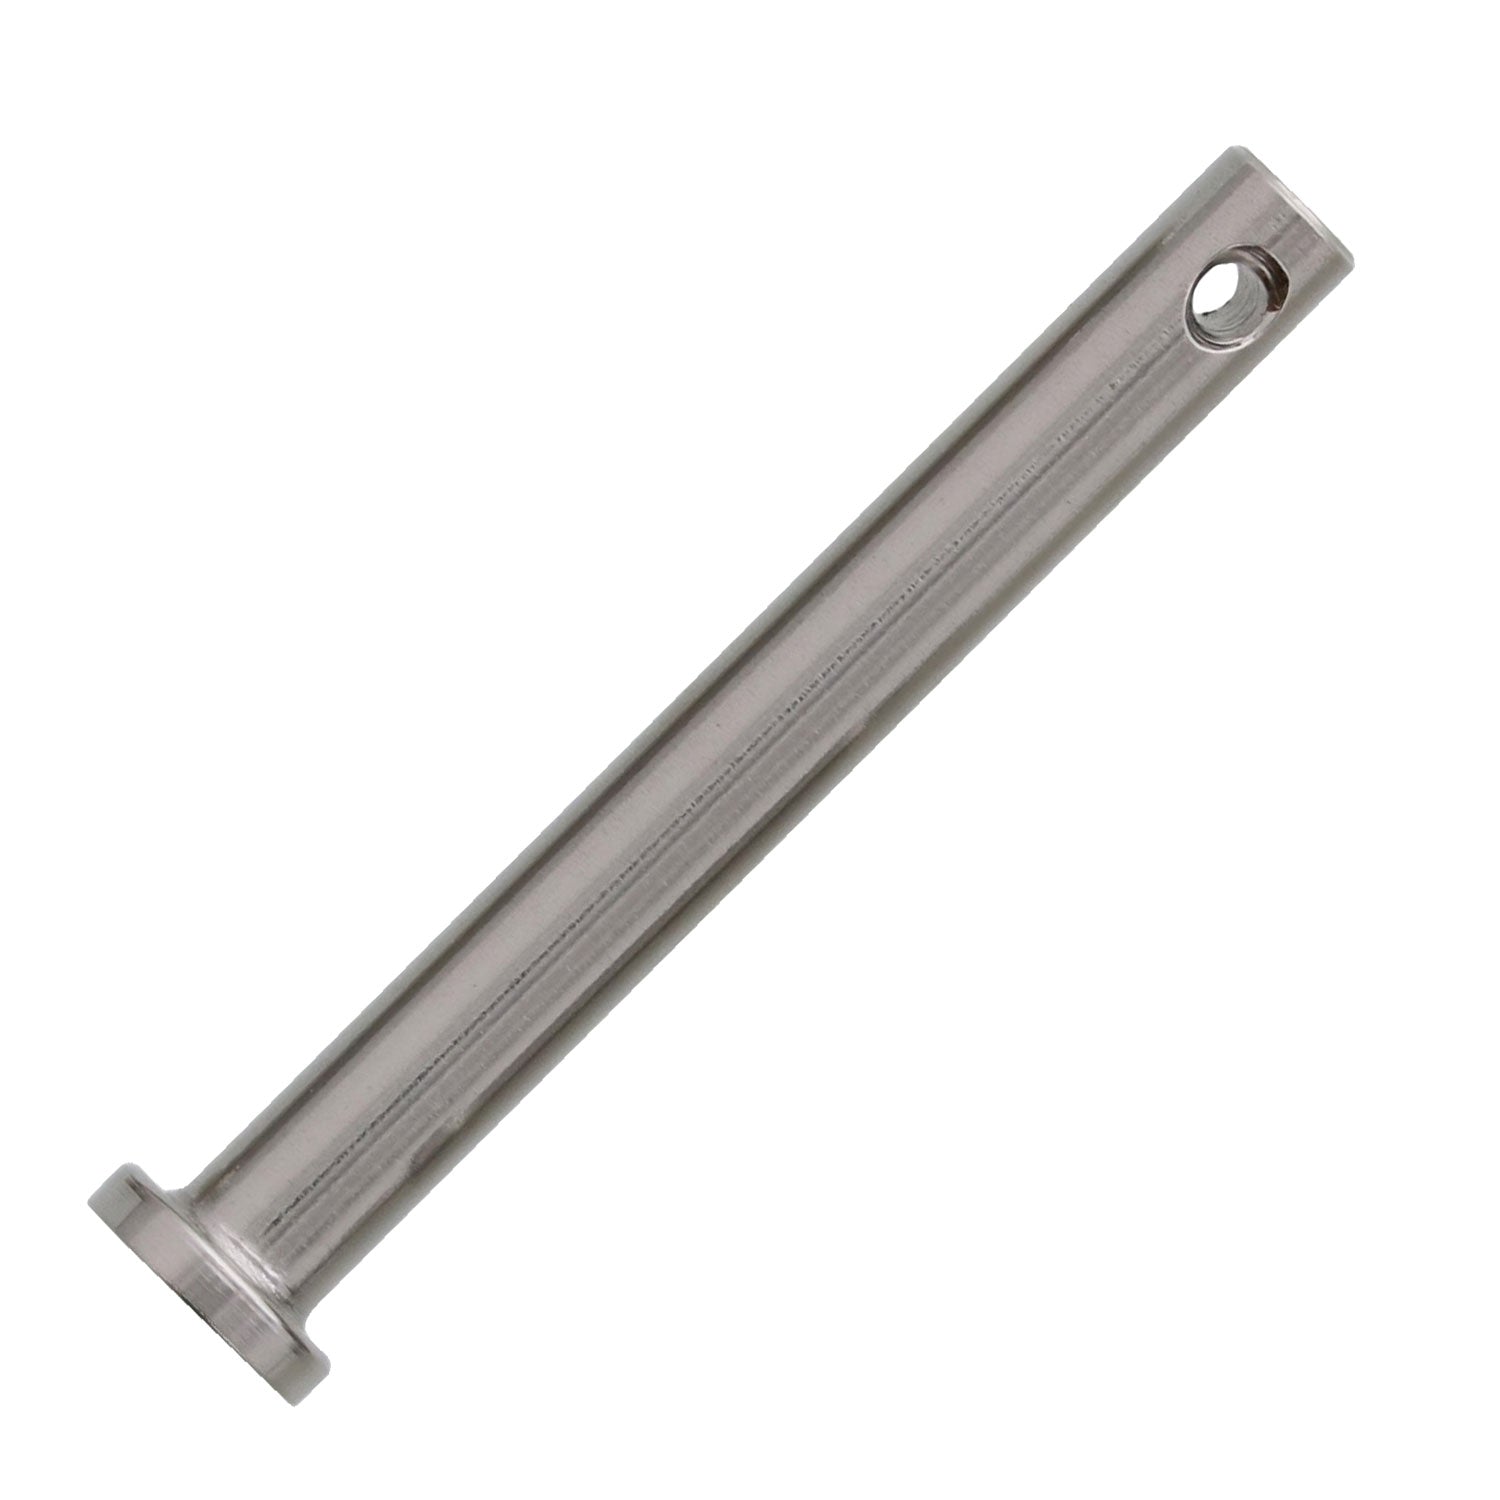 6mm x 44mm Stainless Steel Clevis Pin